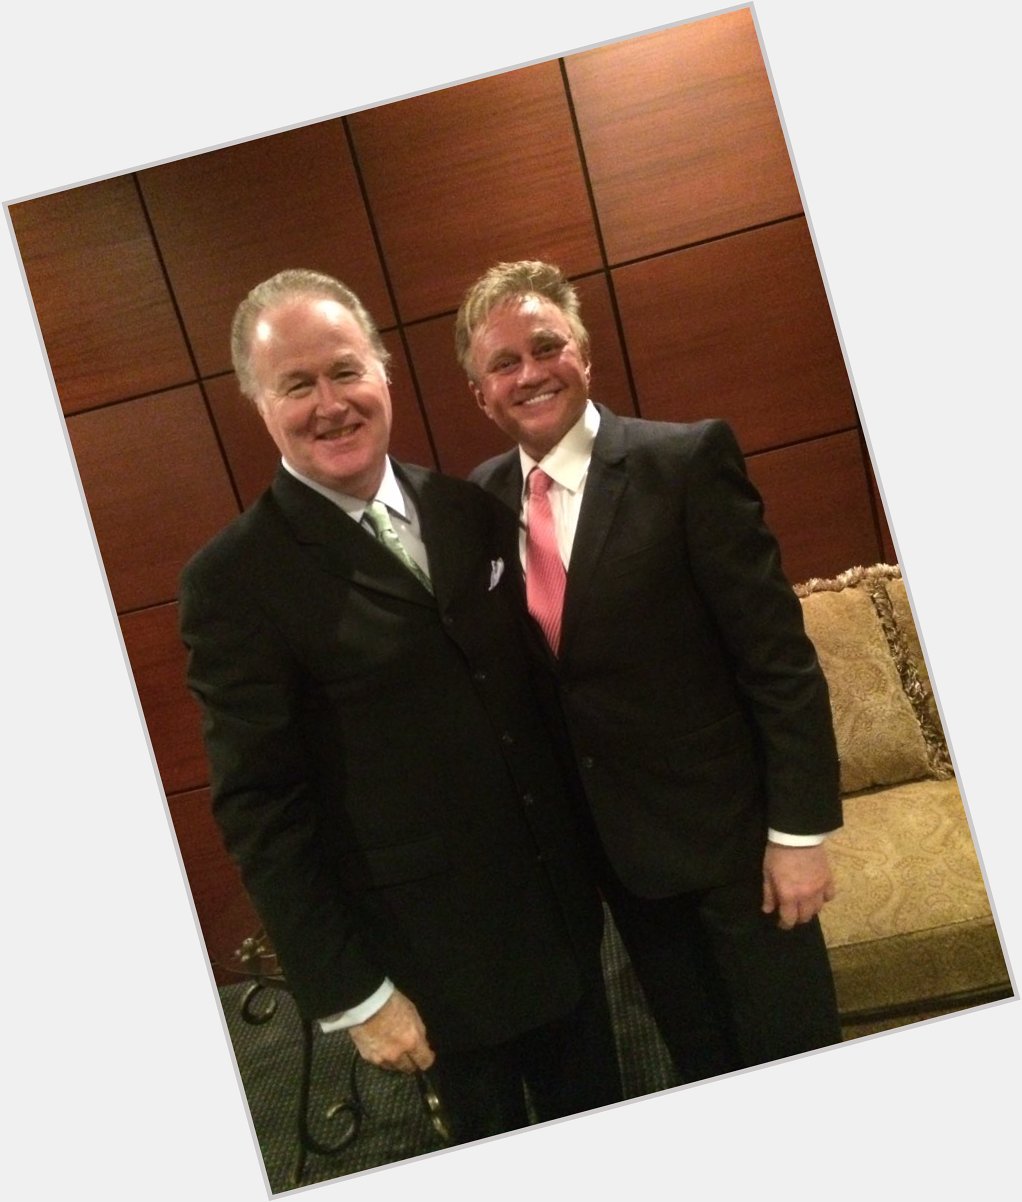 Wishing a very Happy Birthday today to my dear friend, Dr. Richard Roberts 